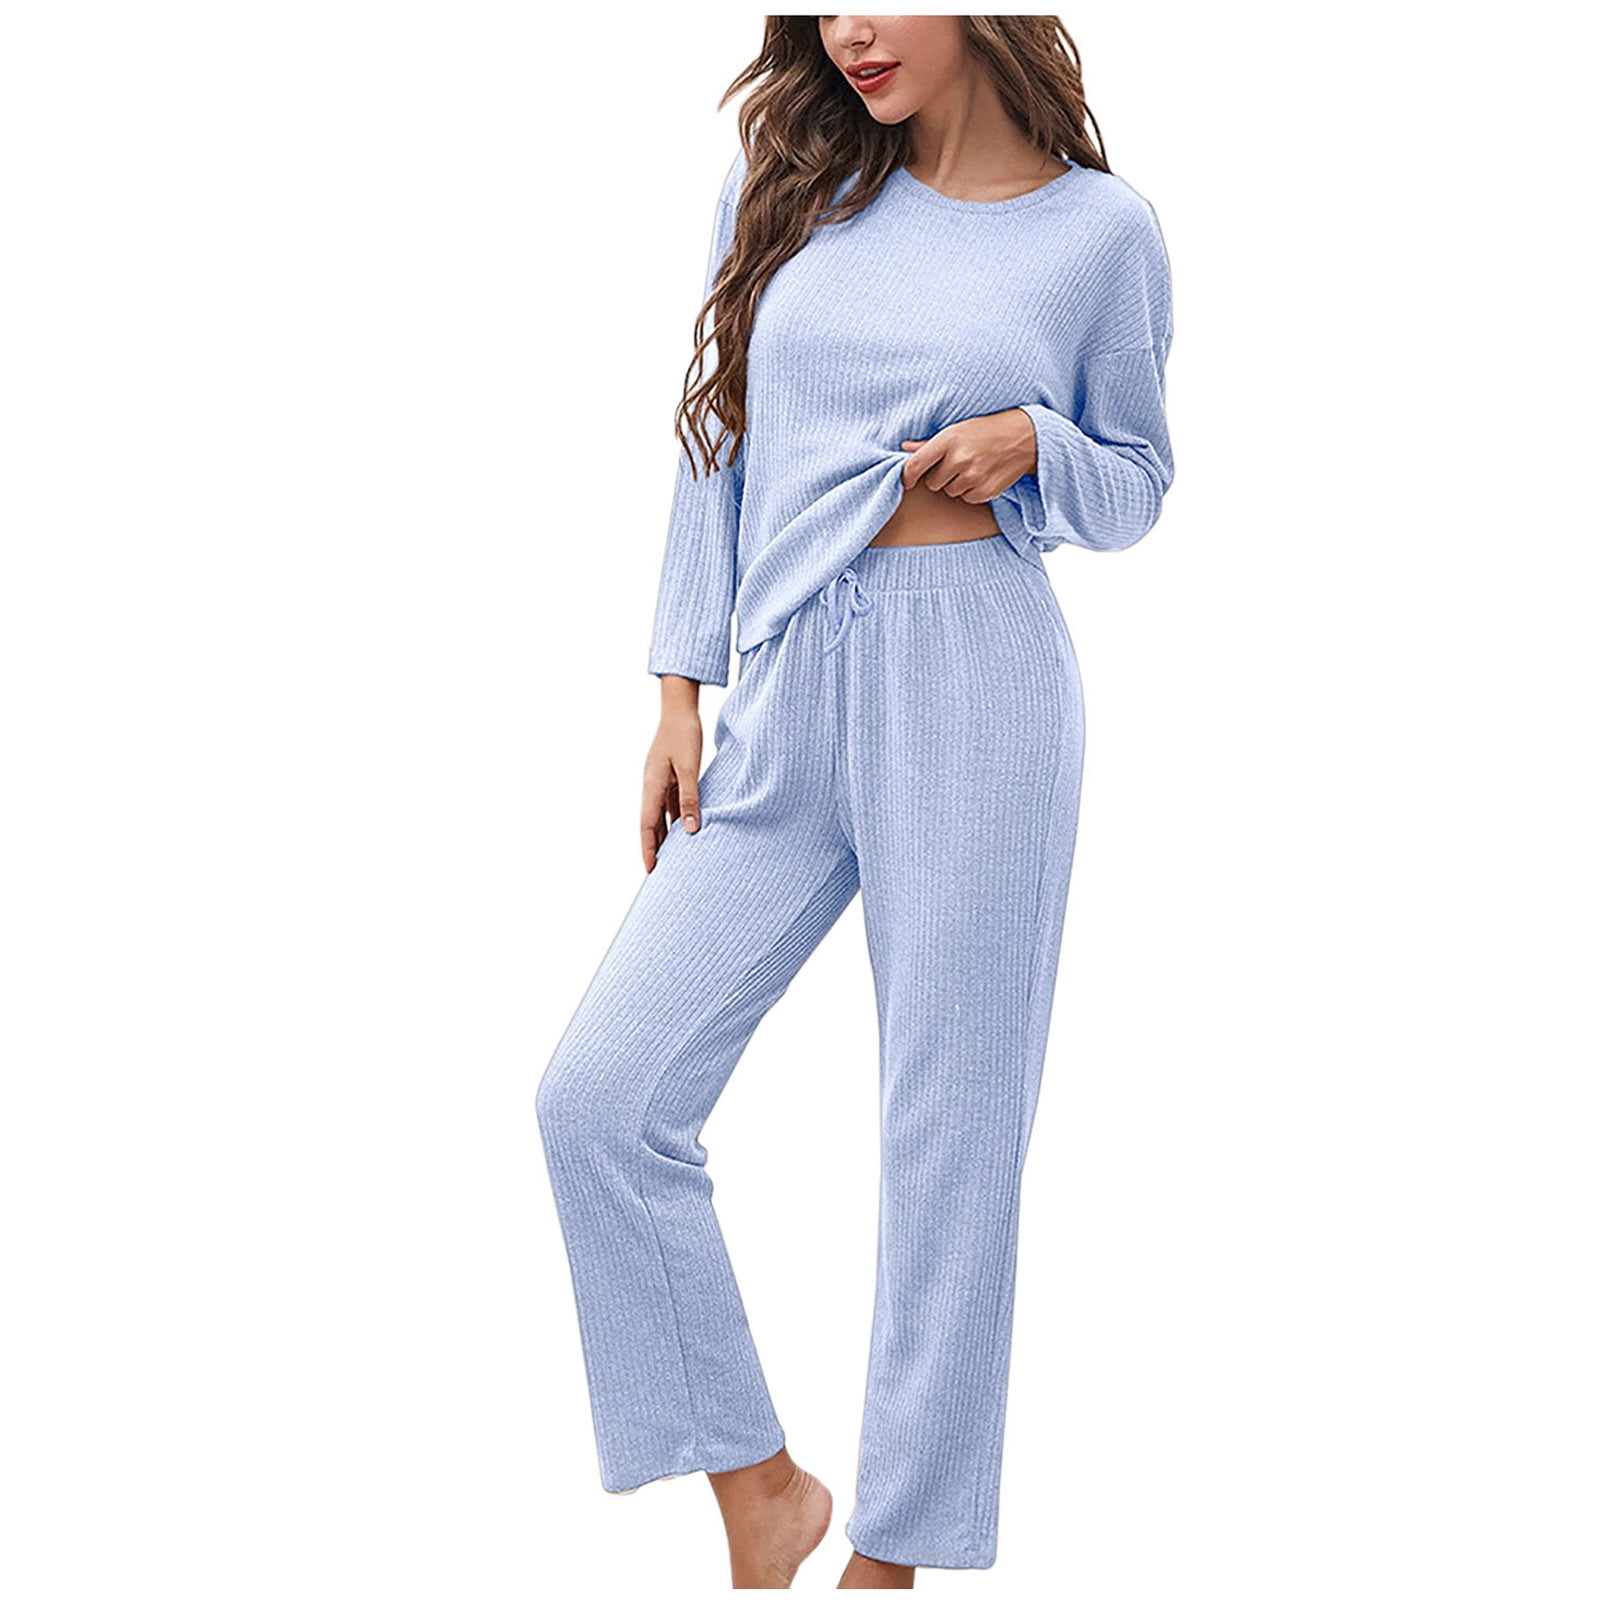 RQYYD On Clearance Women's Sweater Sets Fall Rib Knit 2 Piece Outfit sets  Long Sleeve Pullover Sweater Top and Drawstring Long Pants Tracksuit Blue M  - Walmart.com